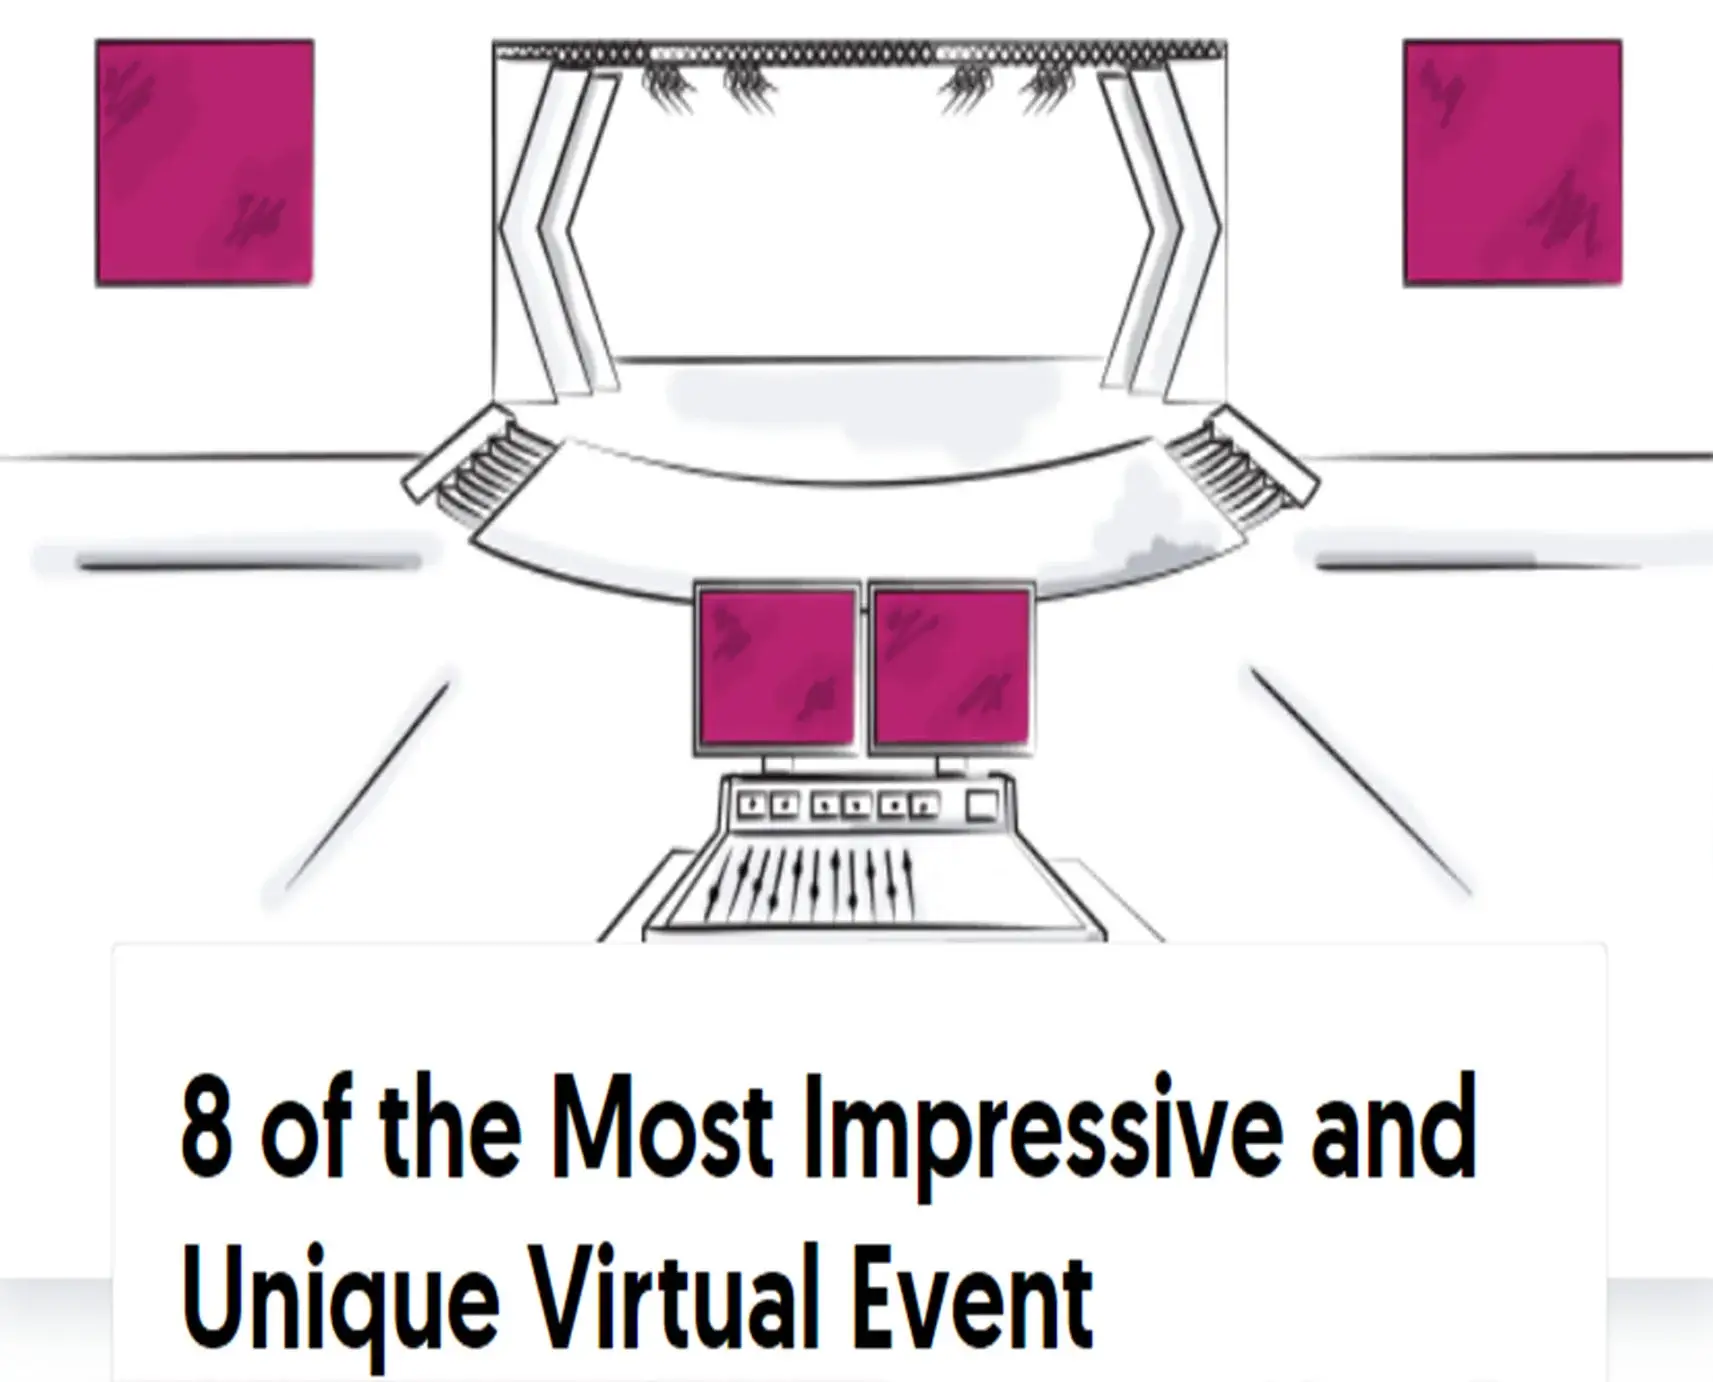 8 of the Most Impressive and Unique Virtual Event Examples